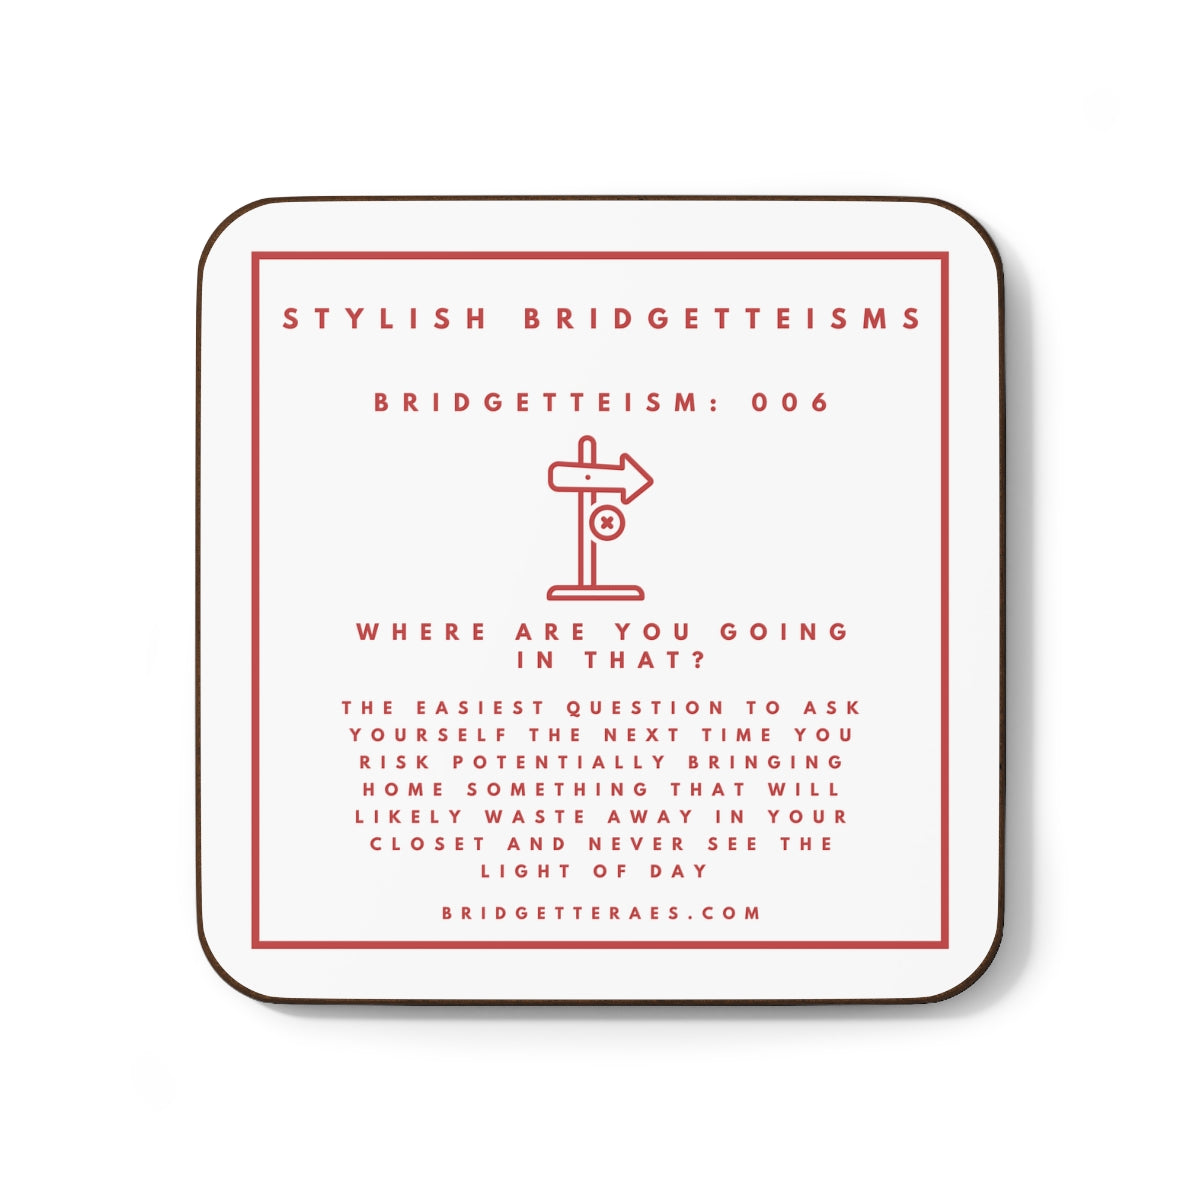 Where Are You Going in That? Stylish Bridgetteism Hardboard Back Coaster